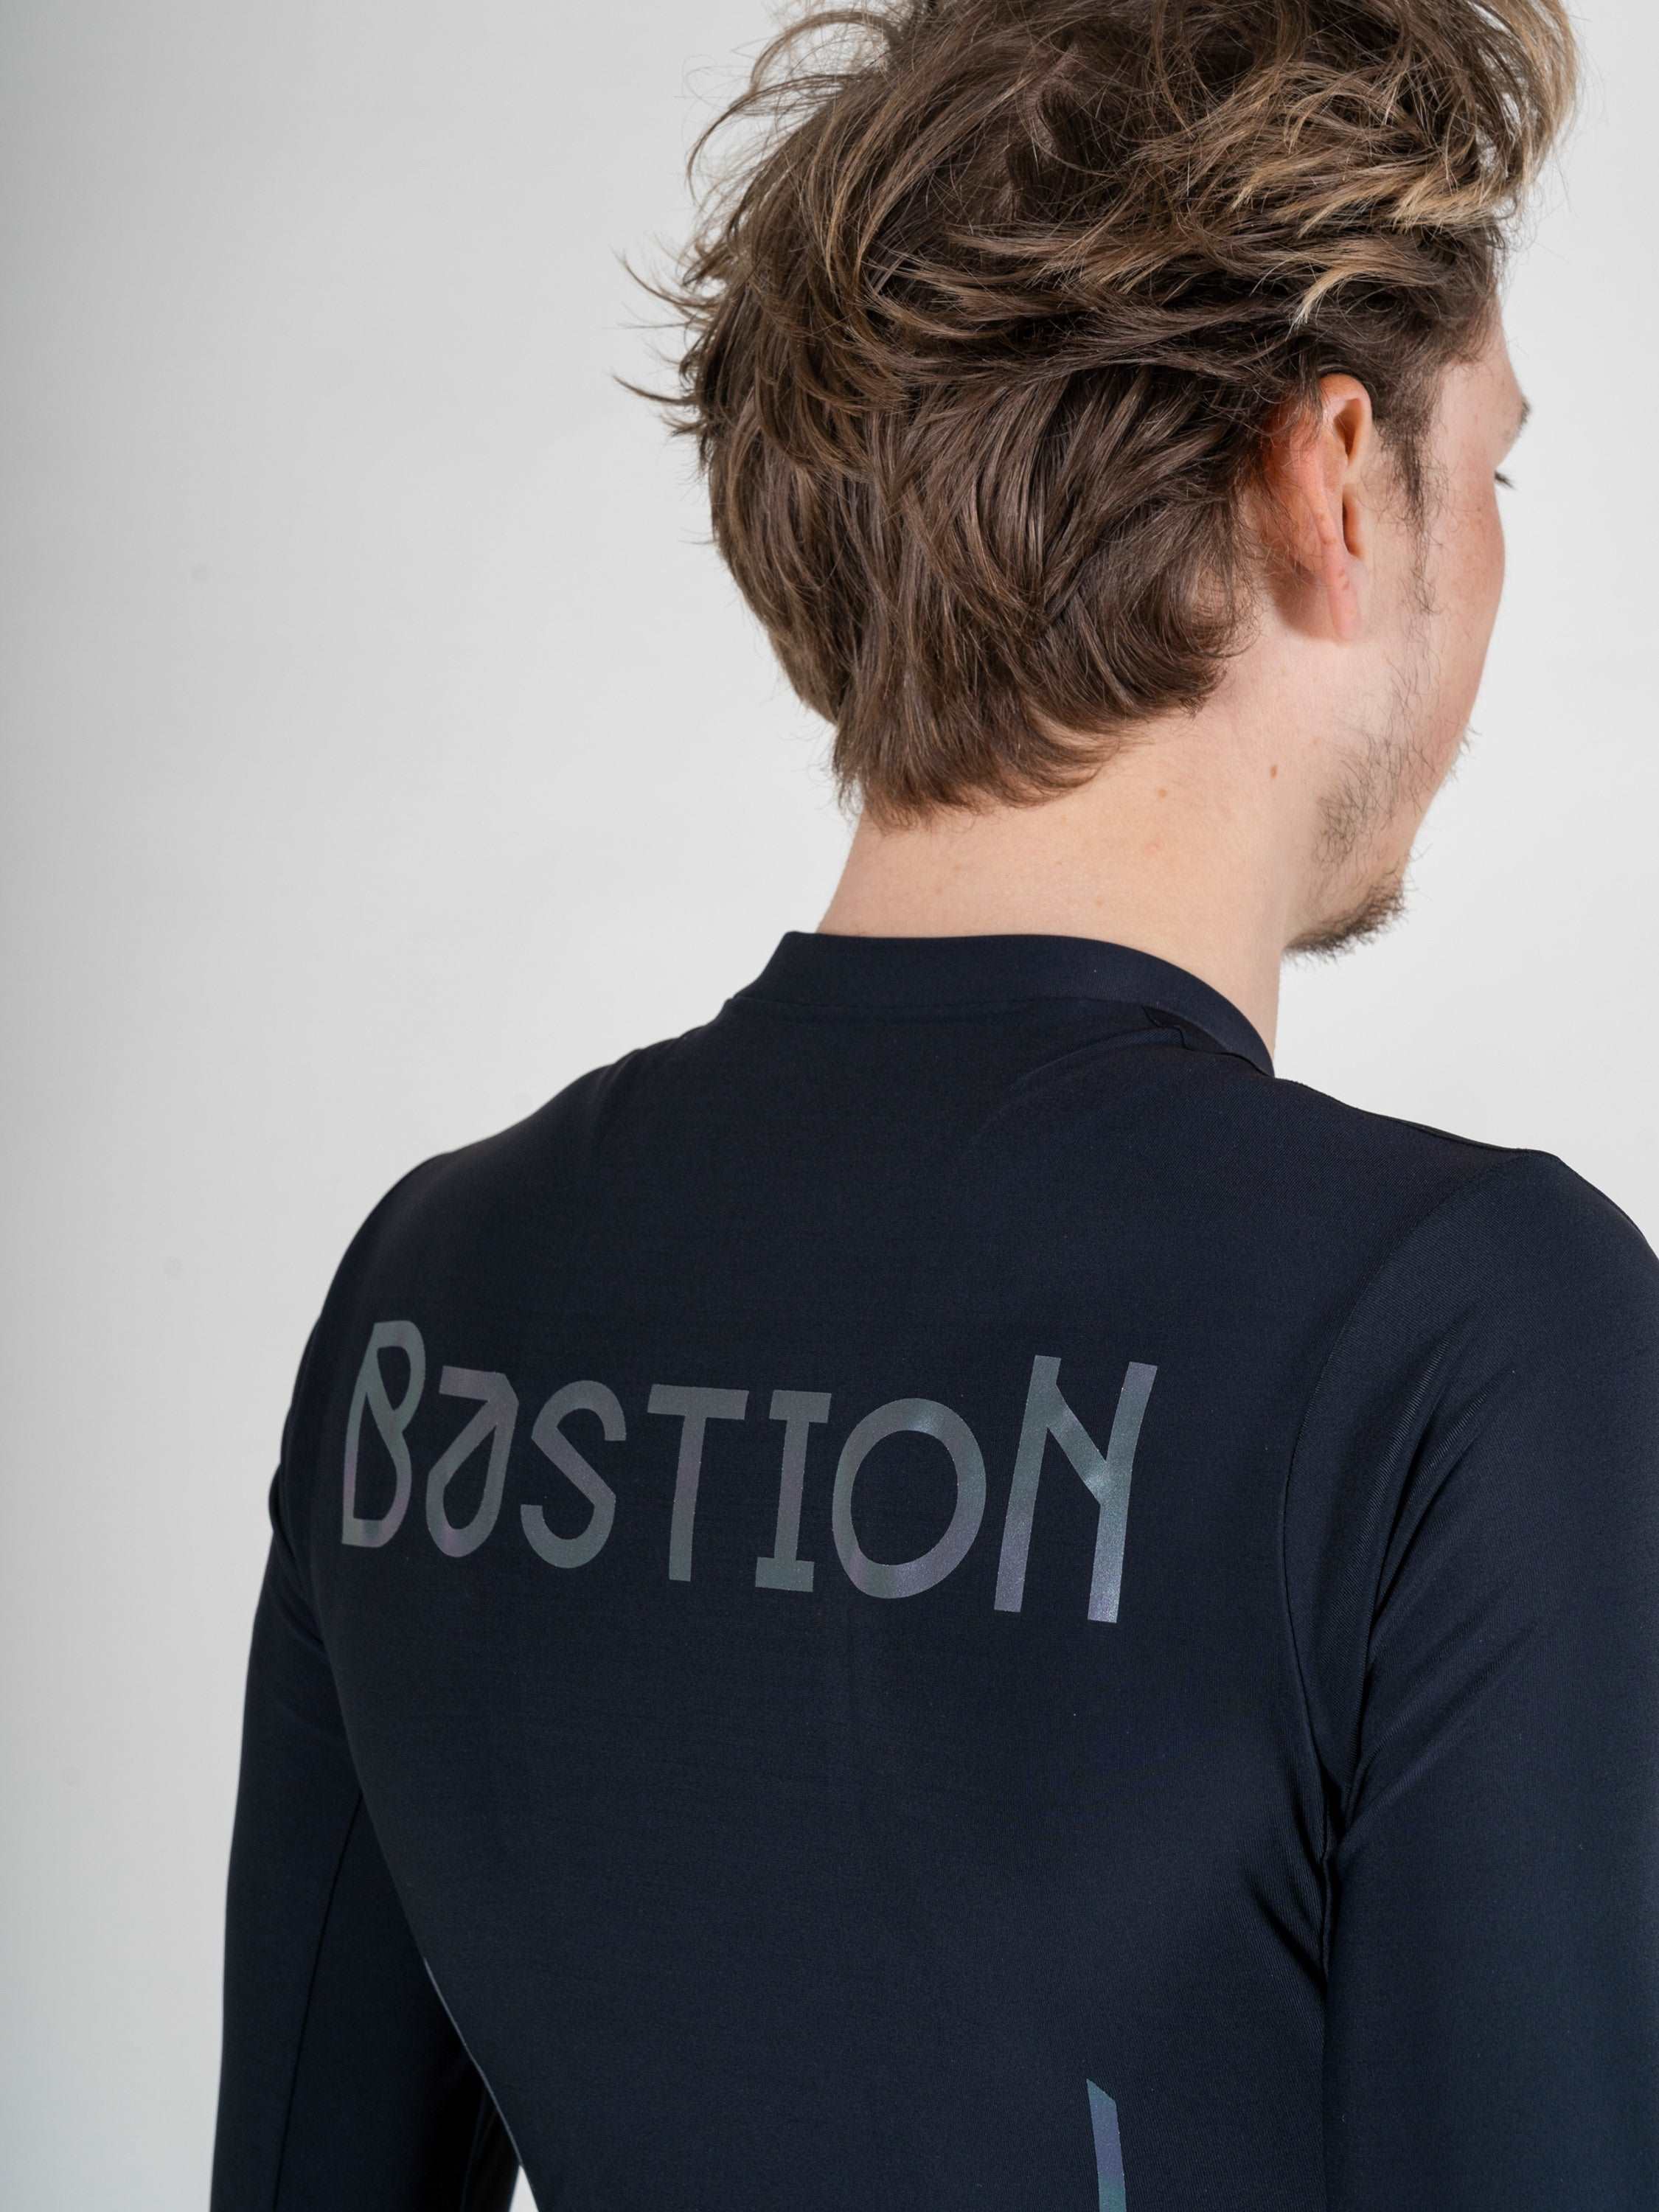 Bastion Cycles - Long Sleeve Training Jersey - Men’s